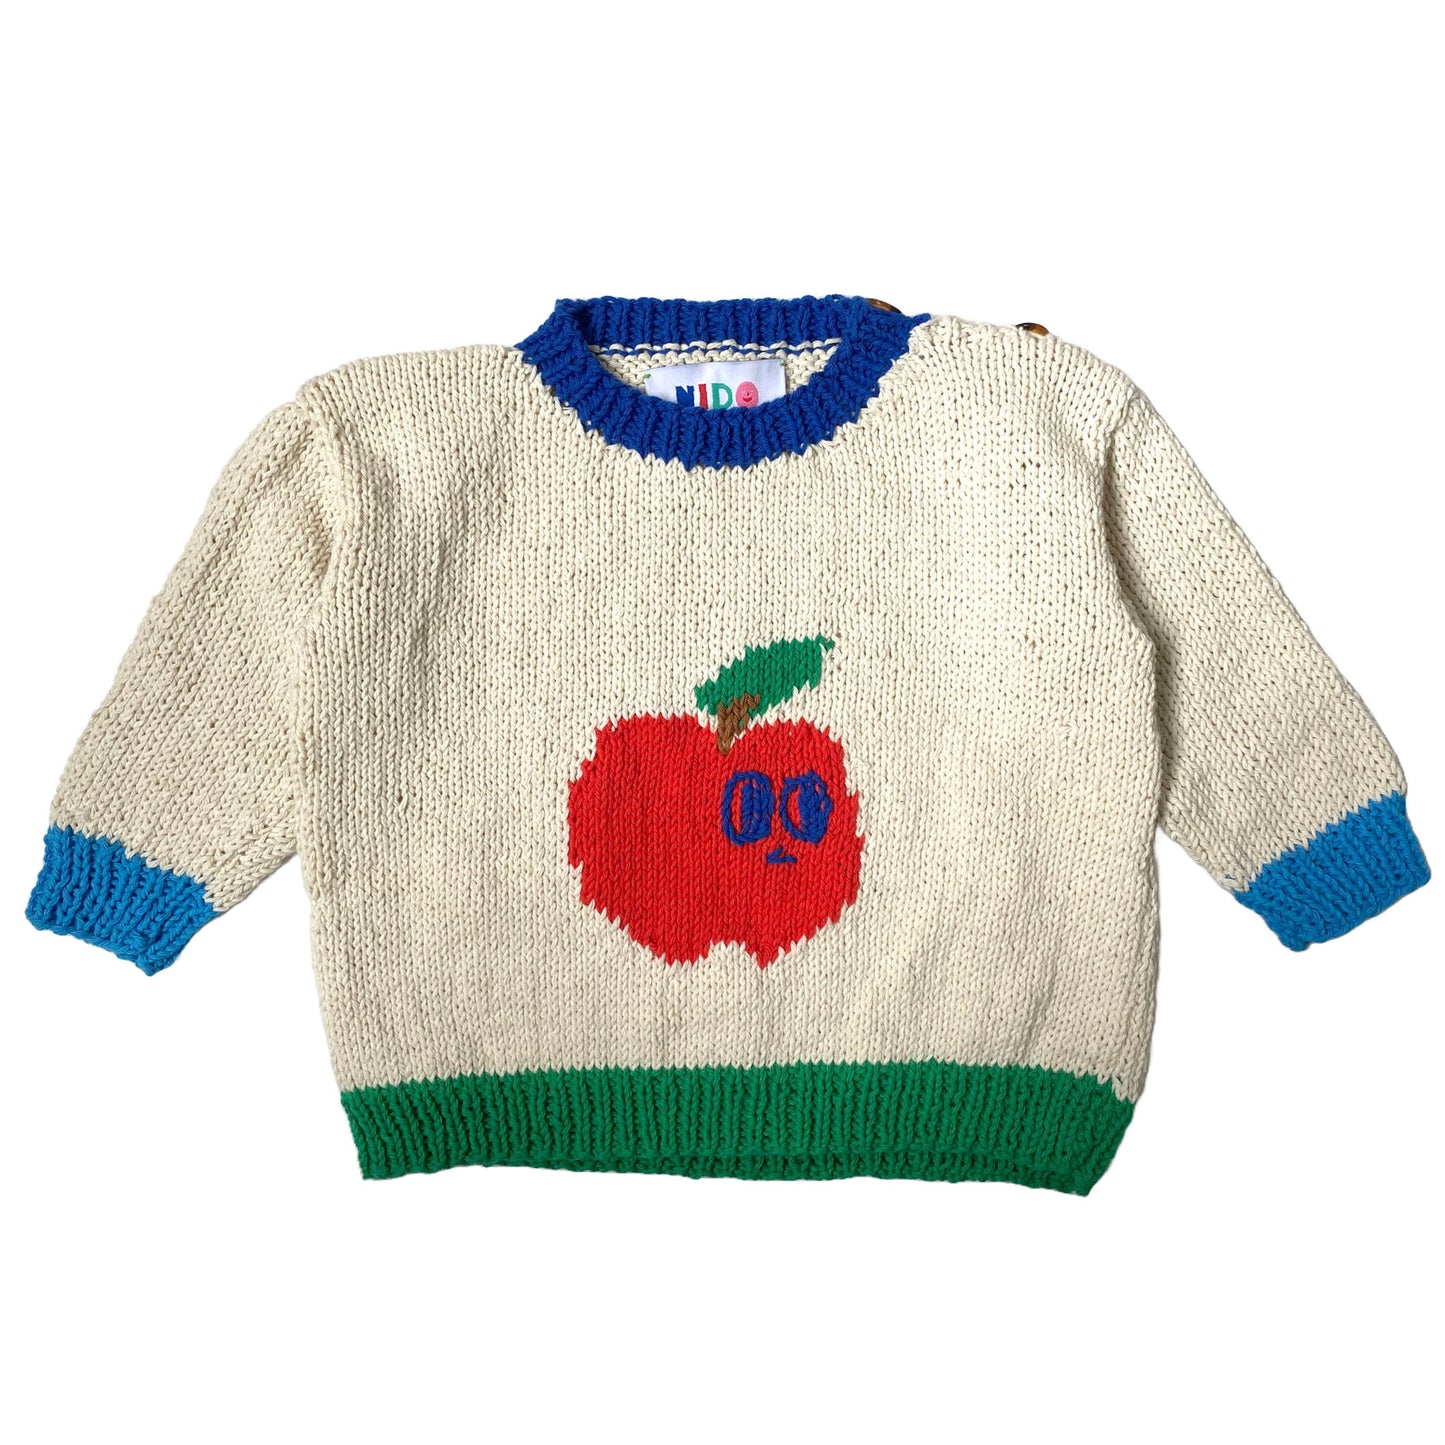 apple sweater, hand knitted for baby